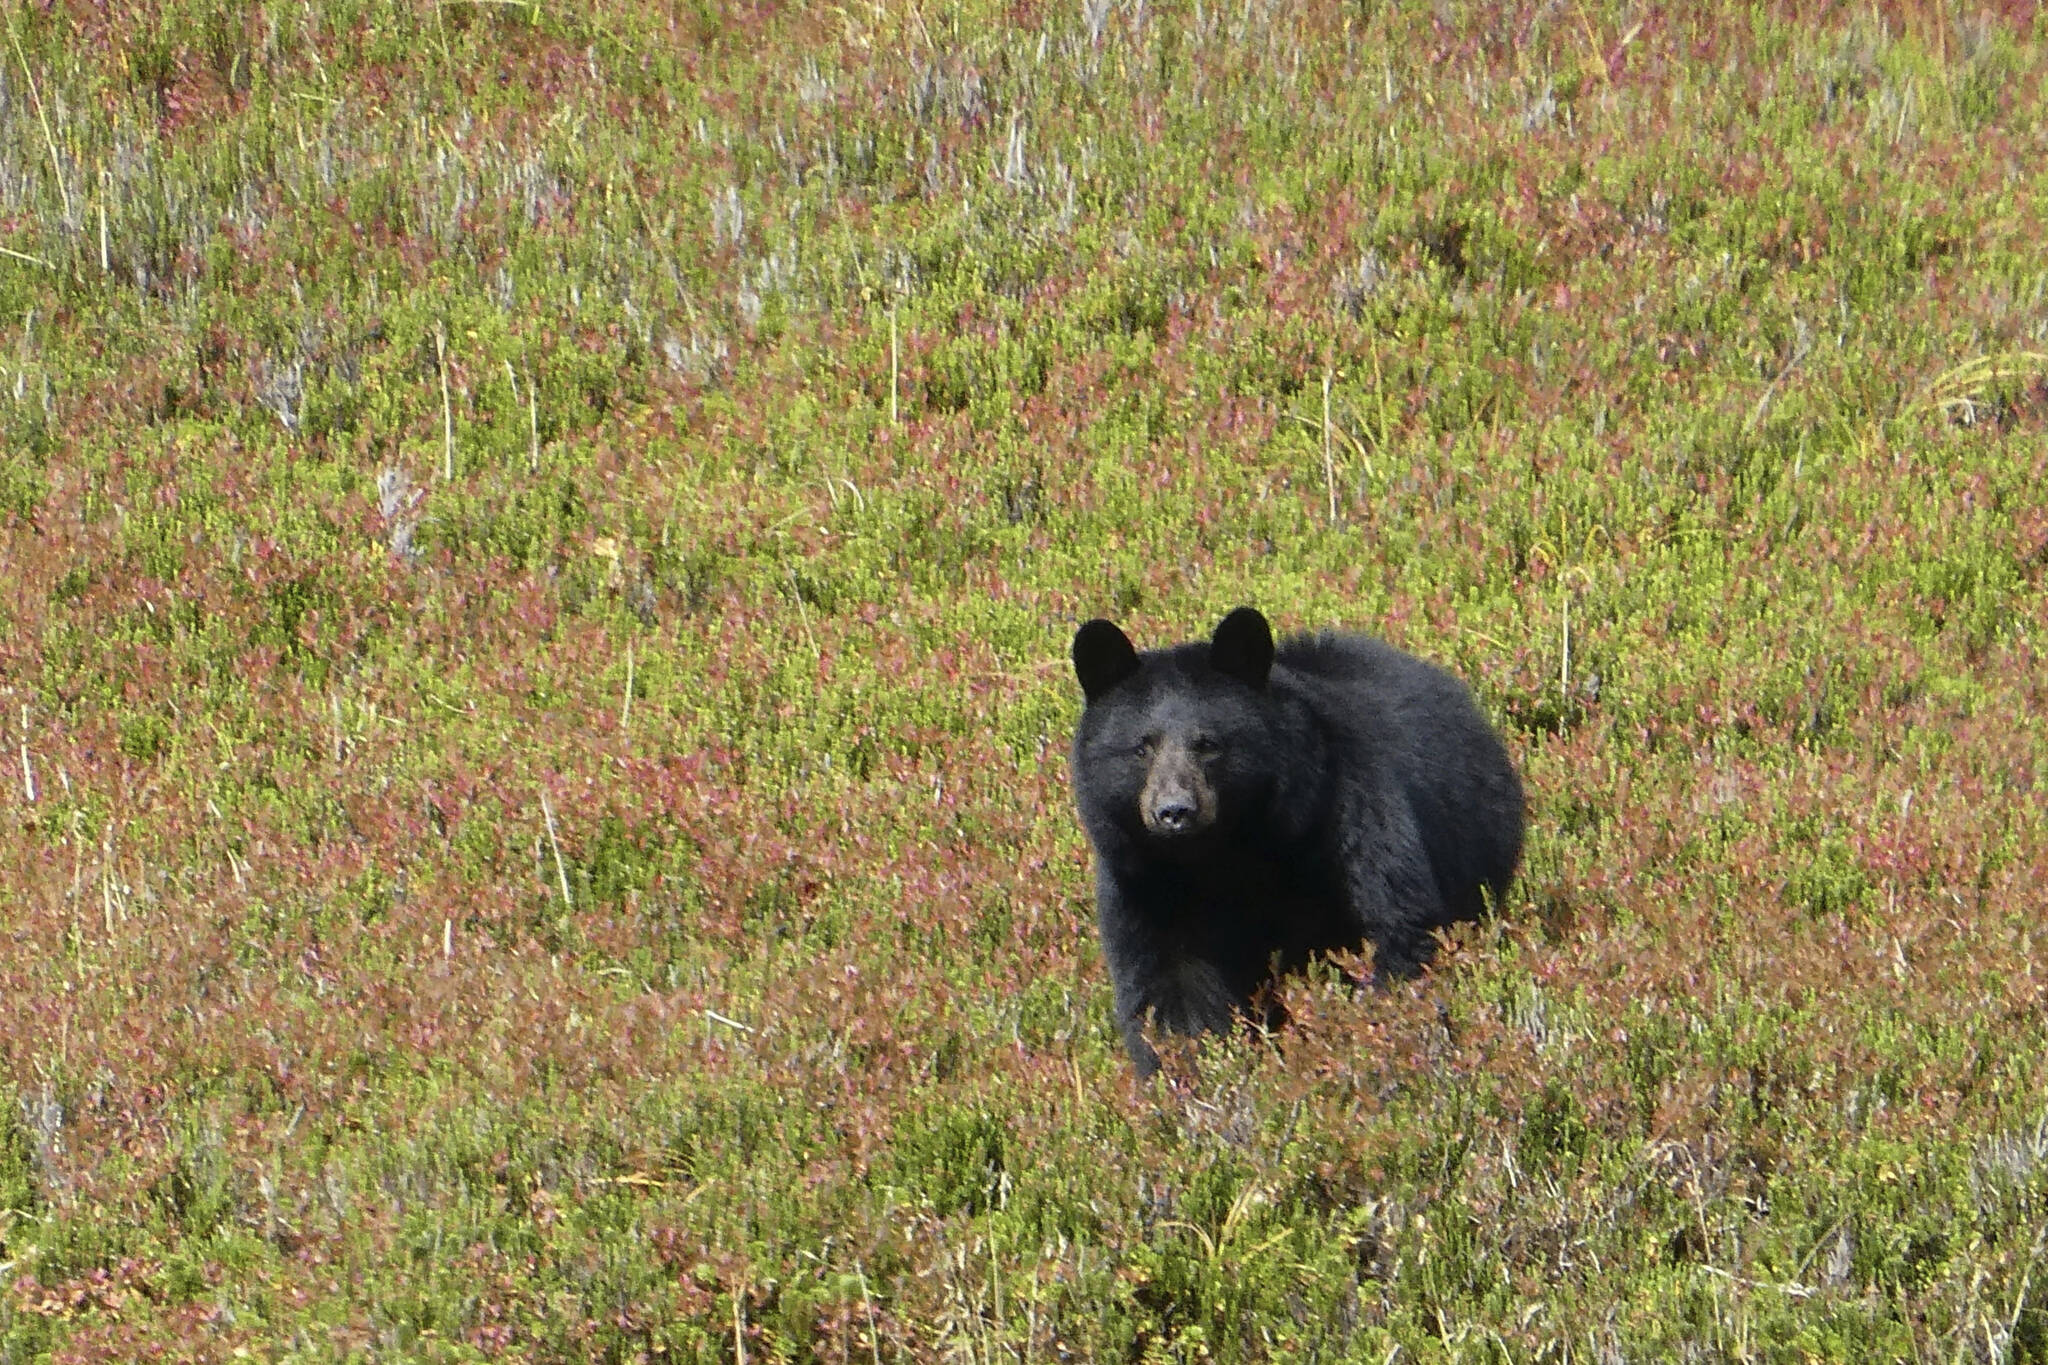 In this Wednesday, Oct. 4, 2017 photo, a black bear checks out his surroundings in Granite Basin in Juneau, Alaska. The National Park Service is proposing a rule that would prohibit bear baiting in national preserves in Alaska, the latest in a dispute over what animal rights supporters call a cruel practice. The park service said Friday, Jan. 6, 2023 it is proposing a rule barring bear baiting in national preserves in Alaska. (AP Photo / Becky Bohrer)